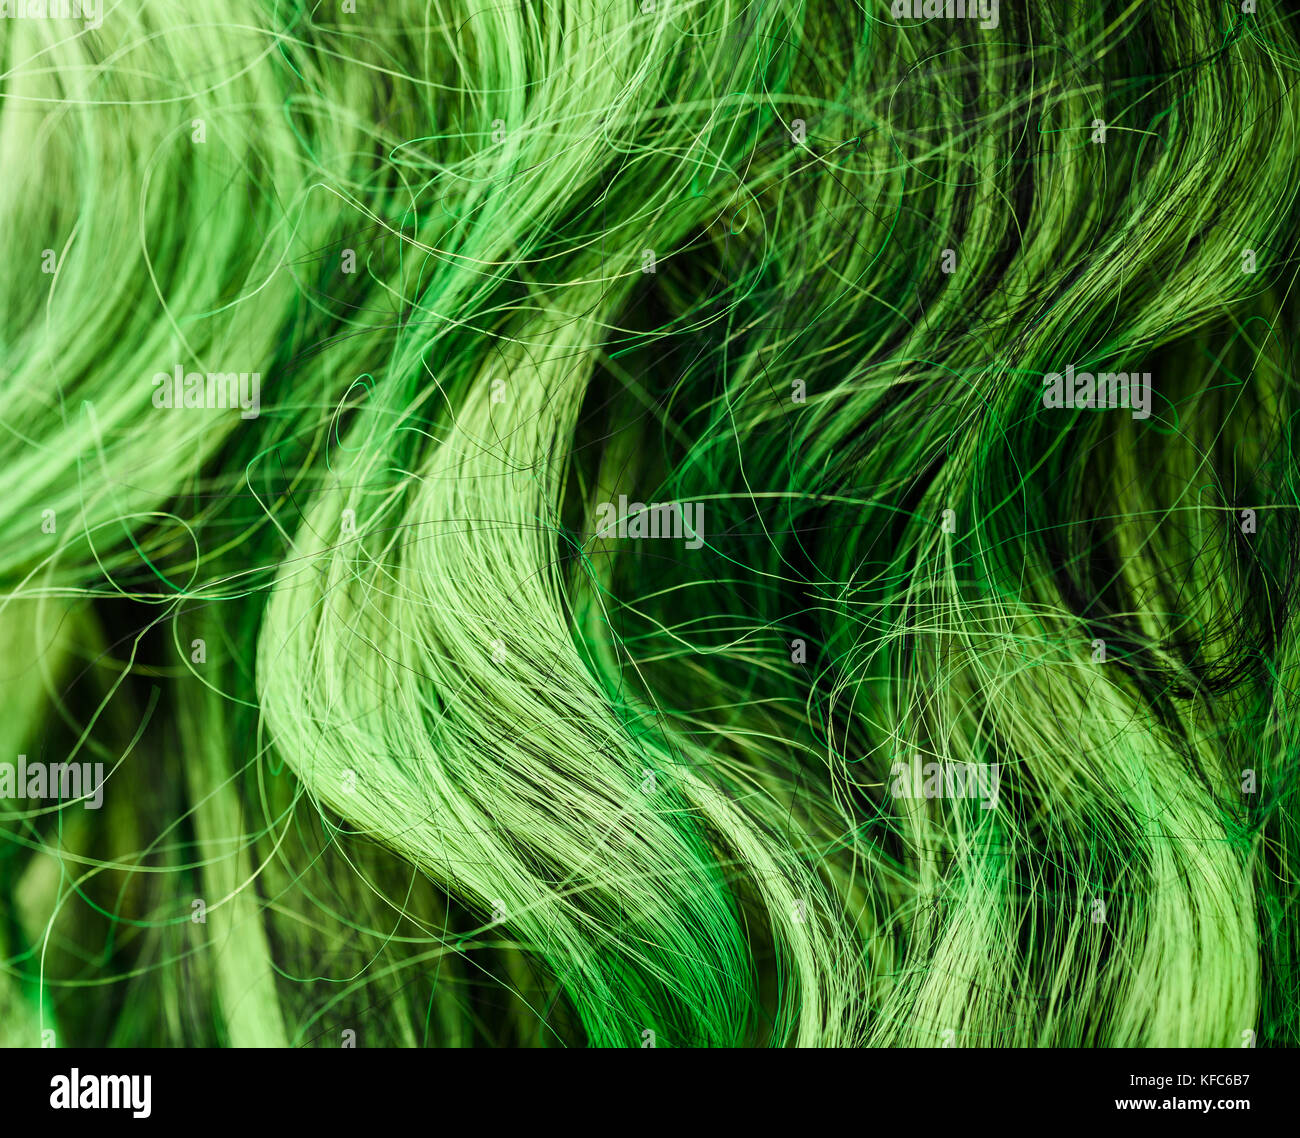 Green wig hair background. Stock Photo